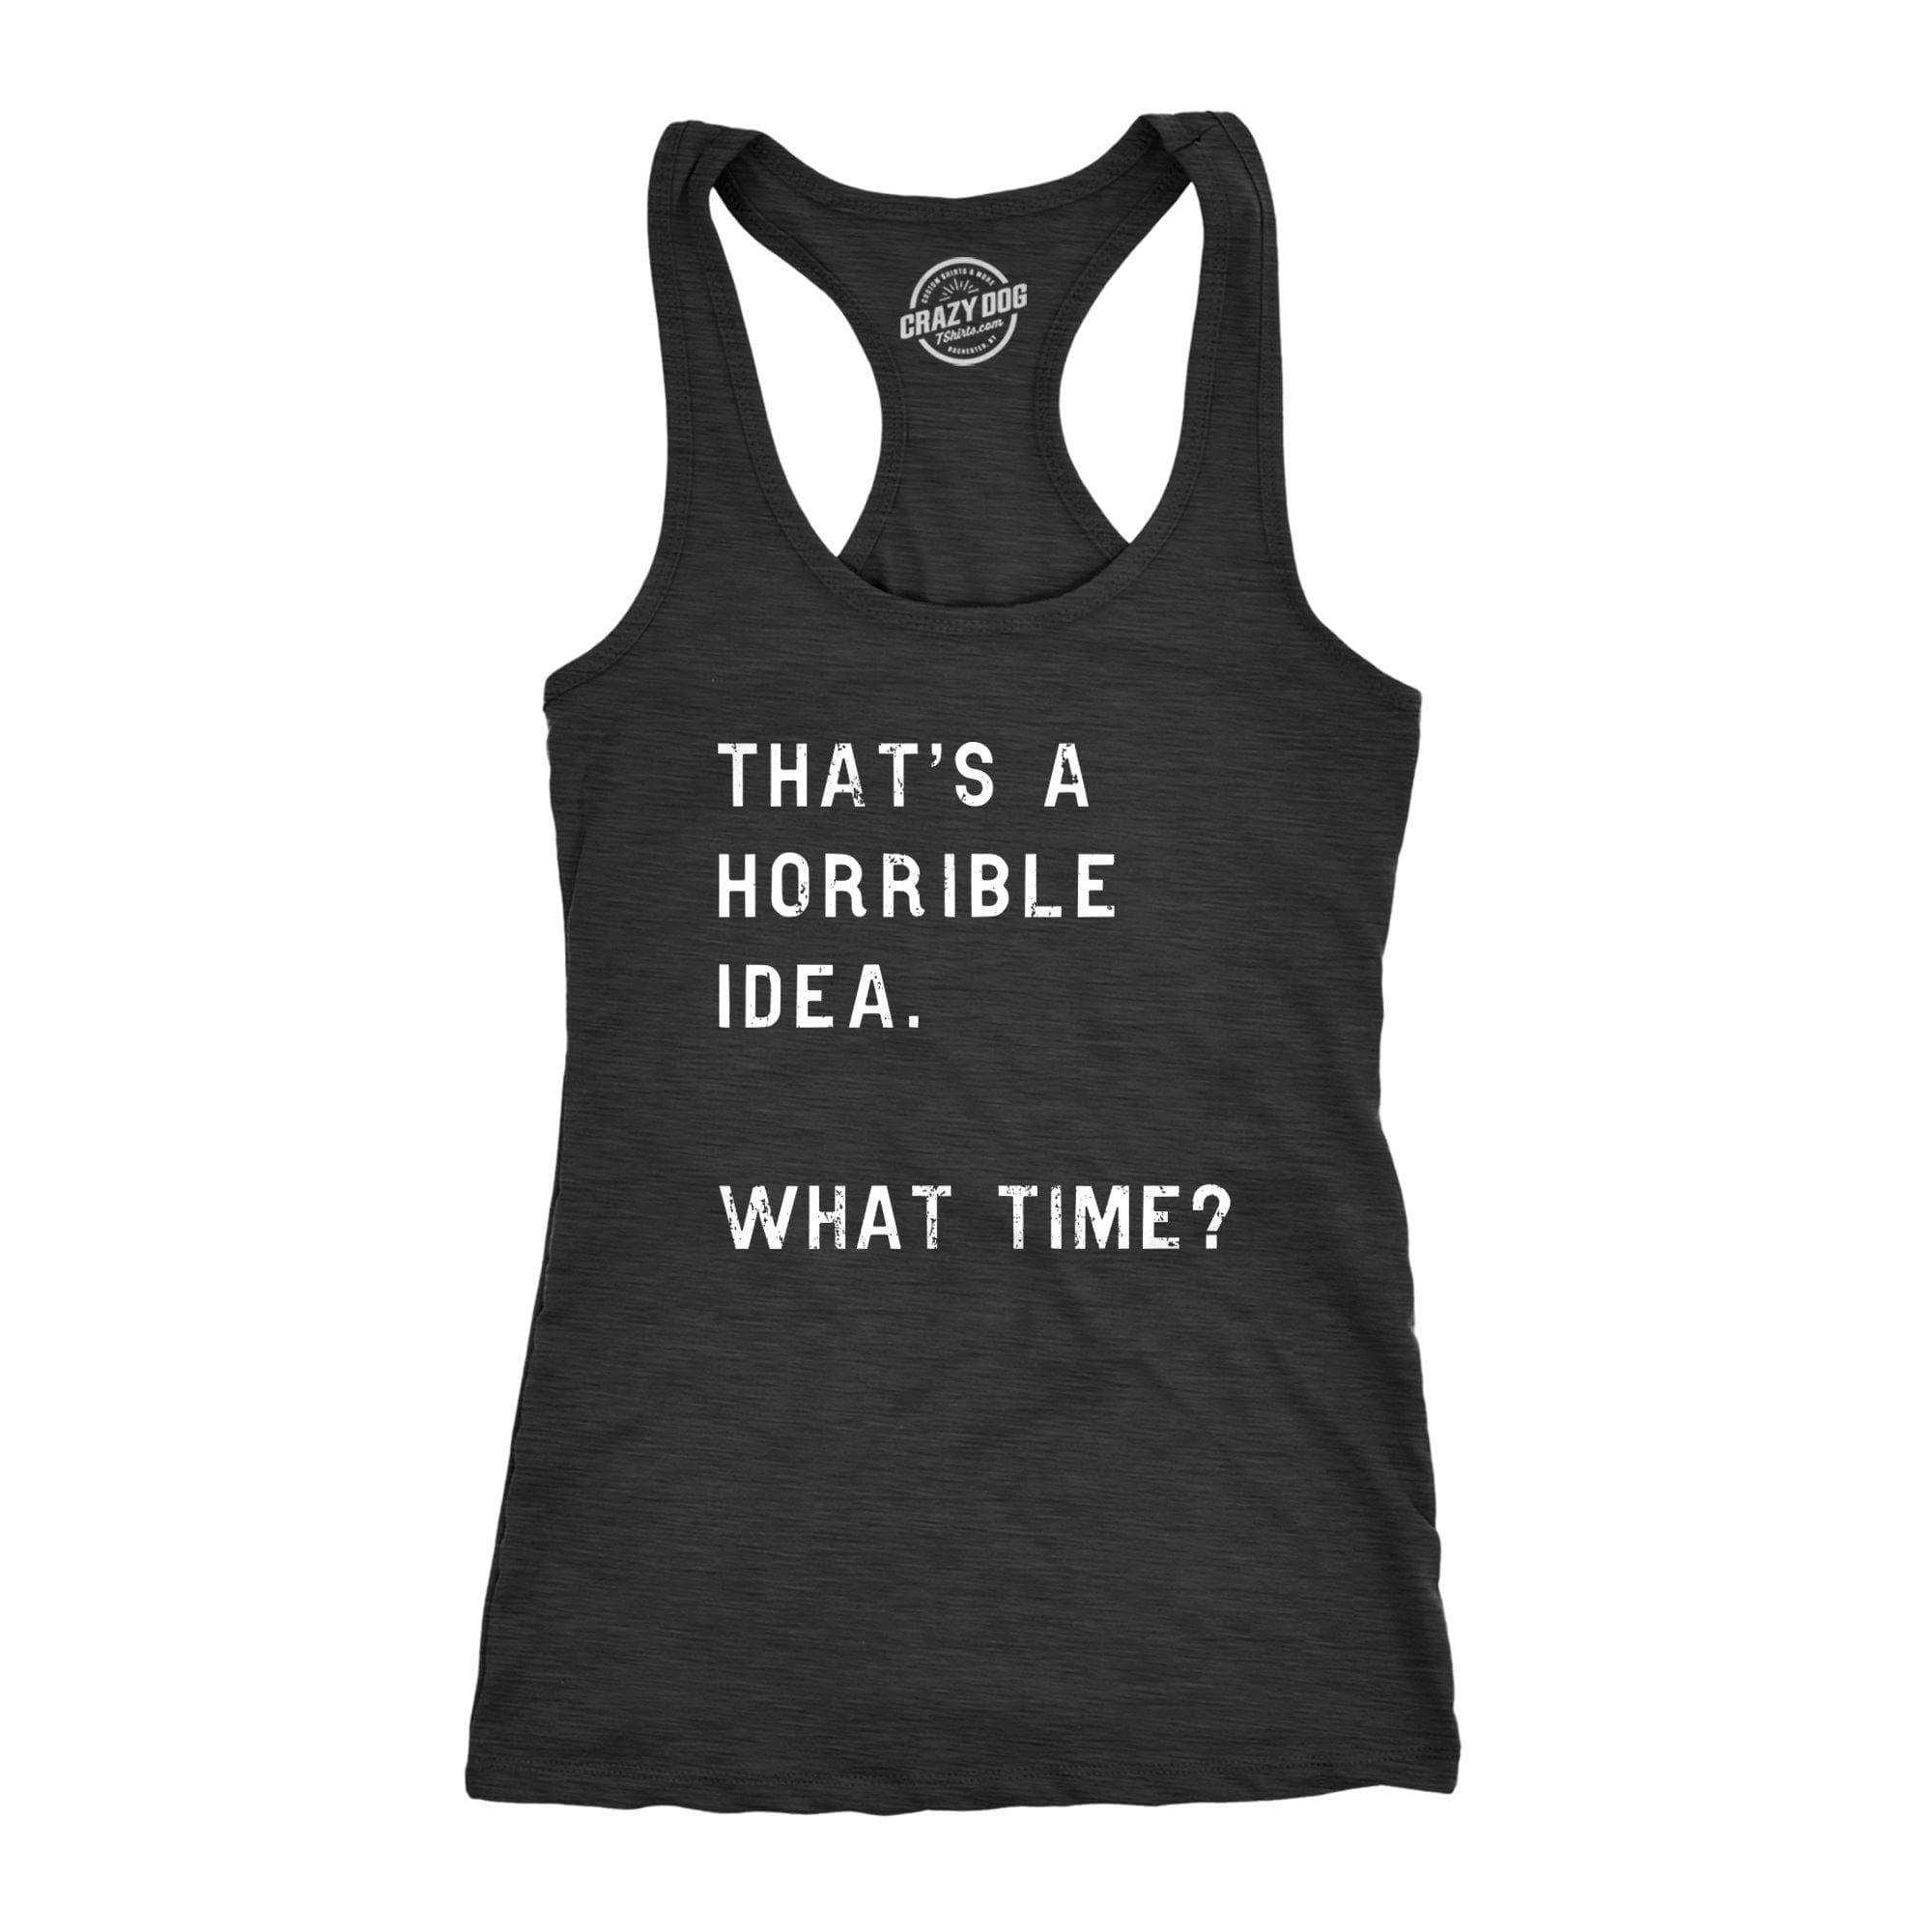 That's A Horrible Idea. What Time? Women's Tank Top  -  Crazy Dog T-Shirts